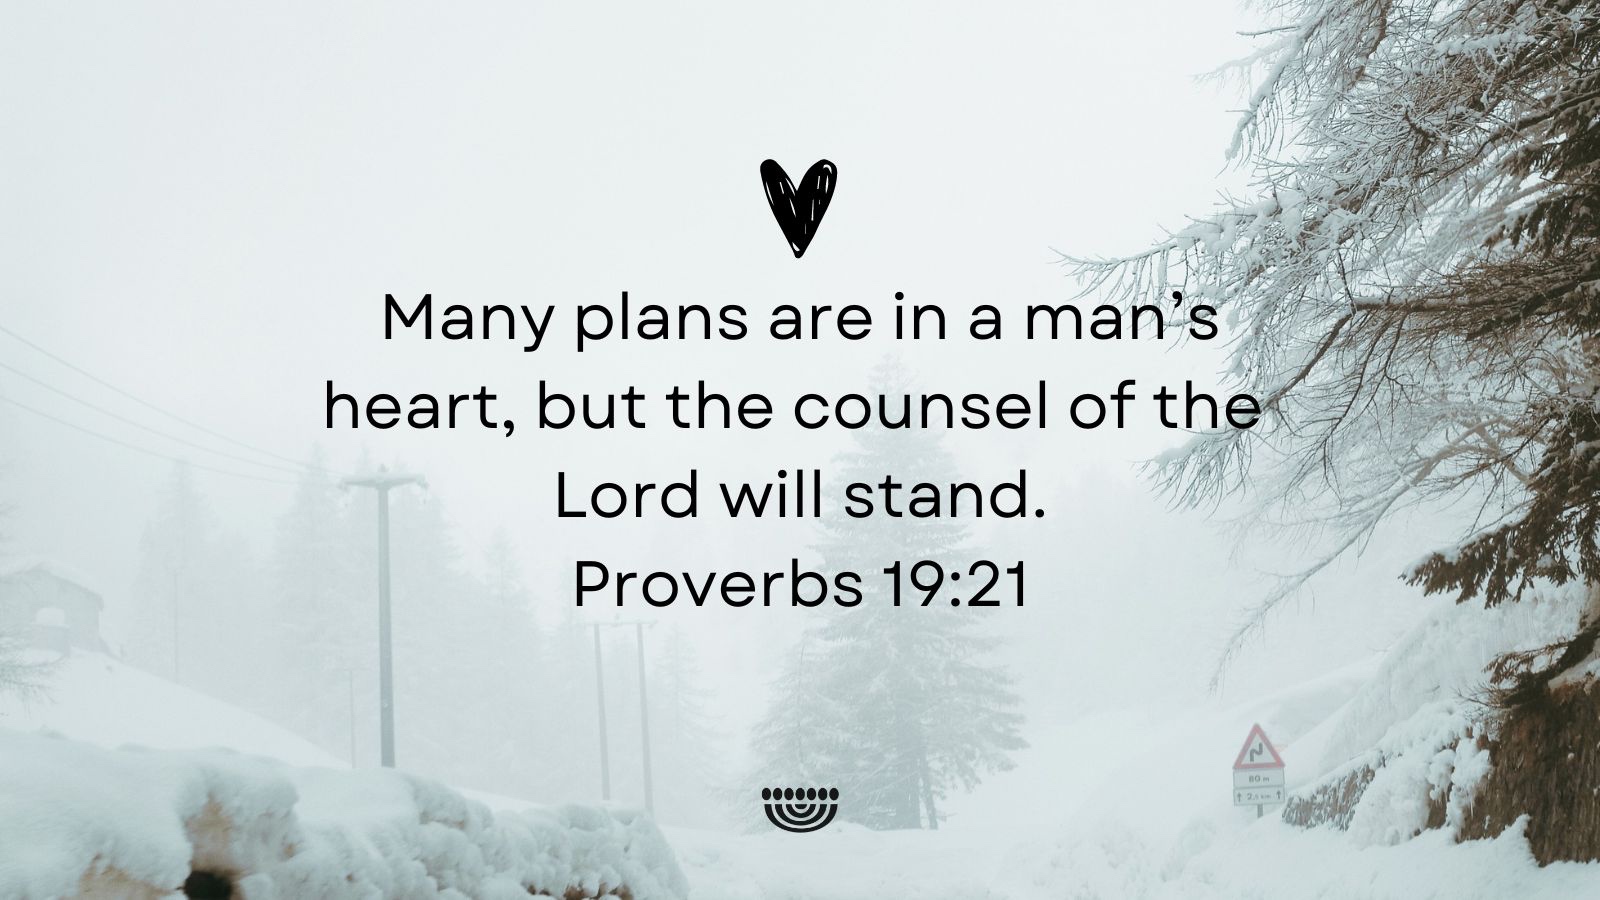 plans are in a man's heart, but the counsel of the Lord will stand: Proverbs 19.21 Many